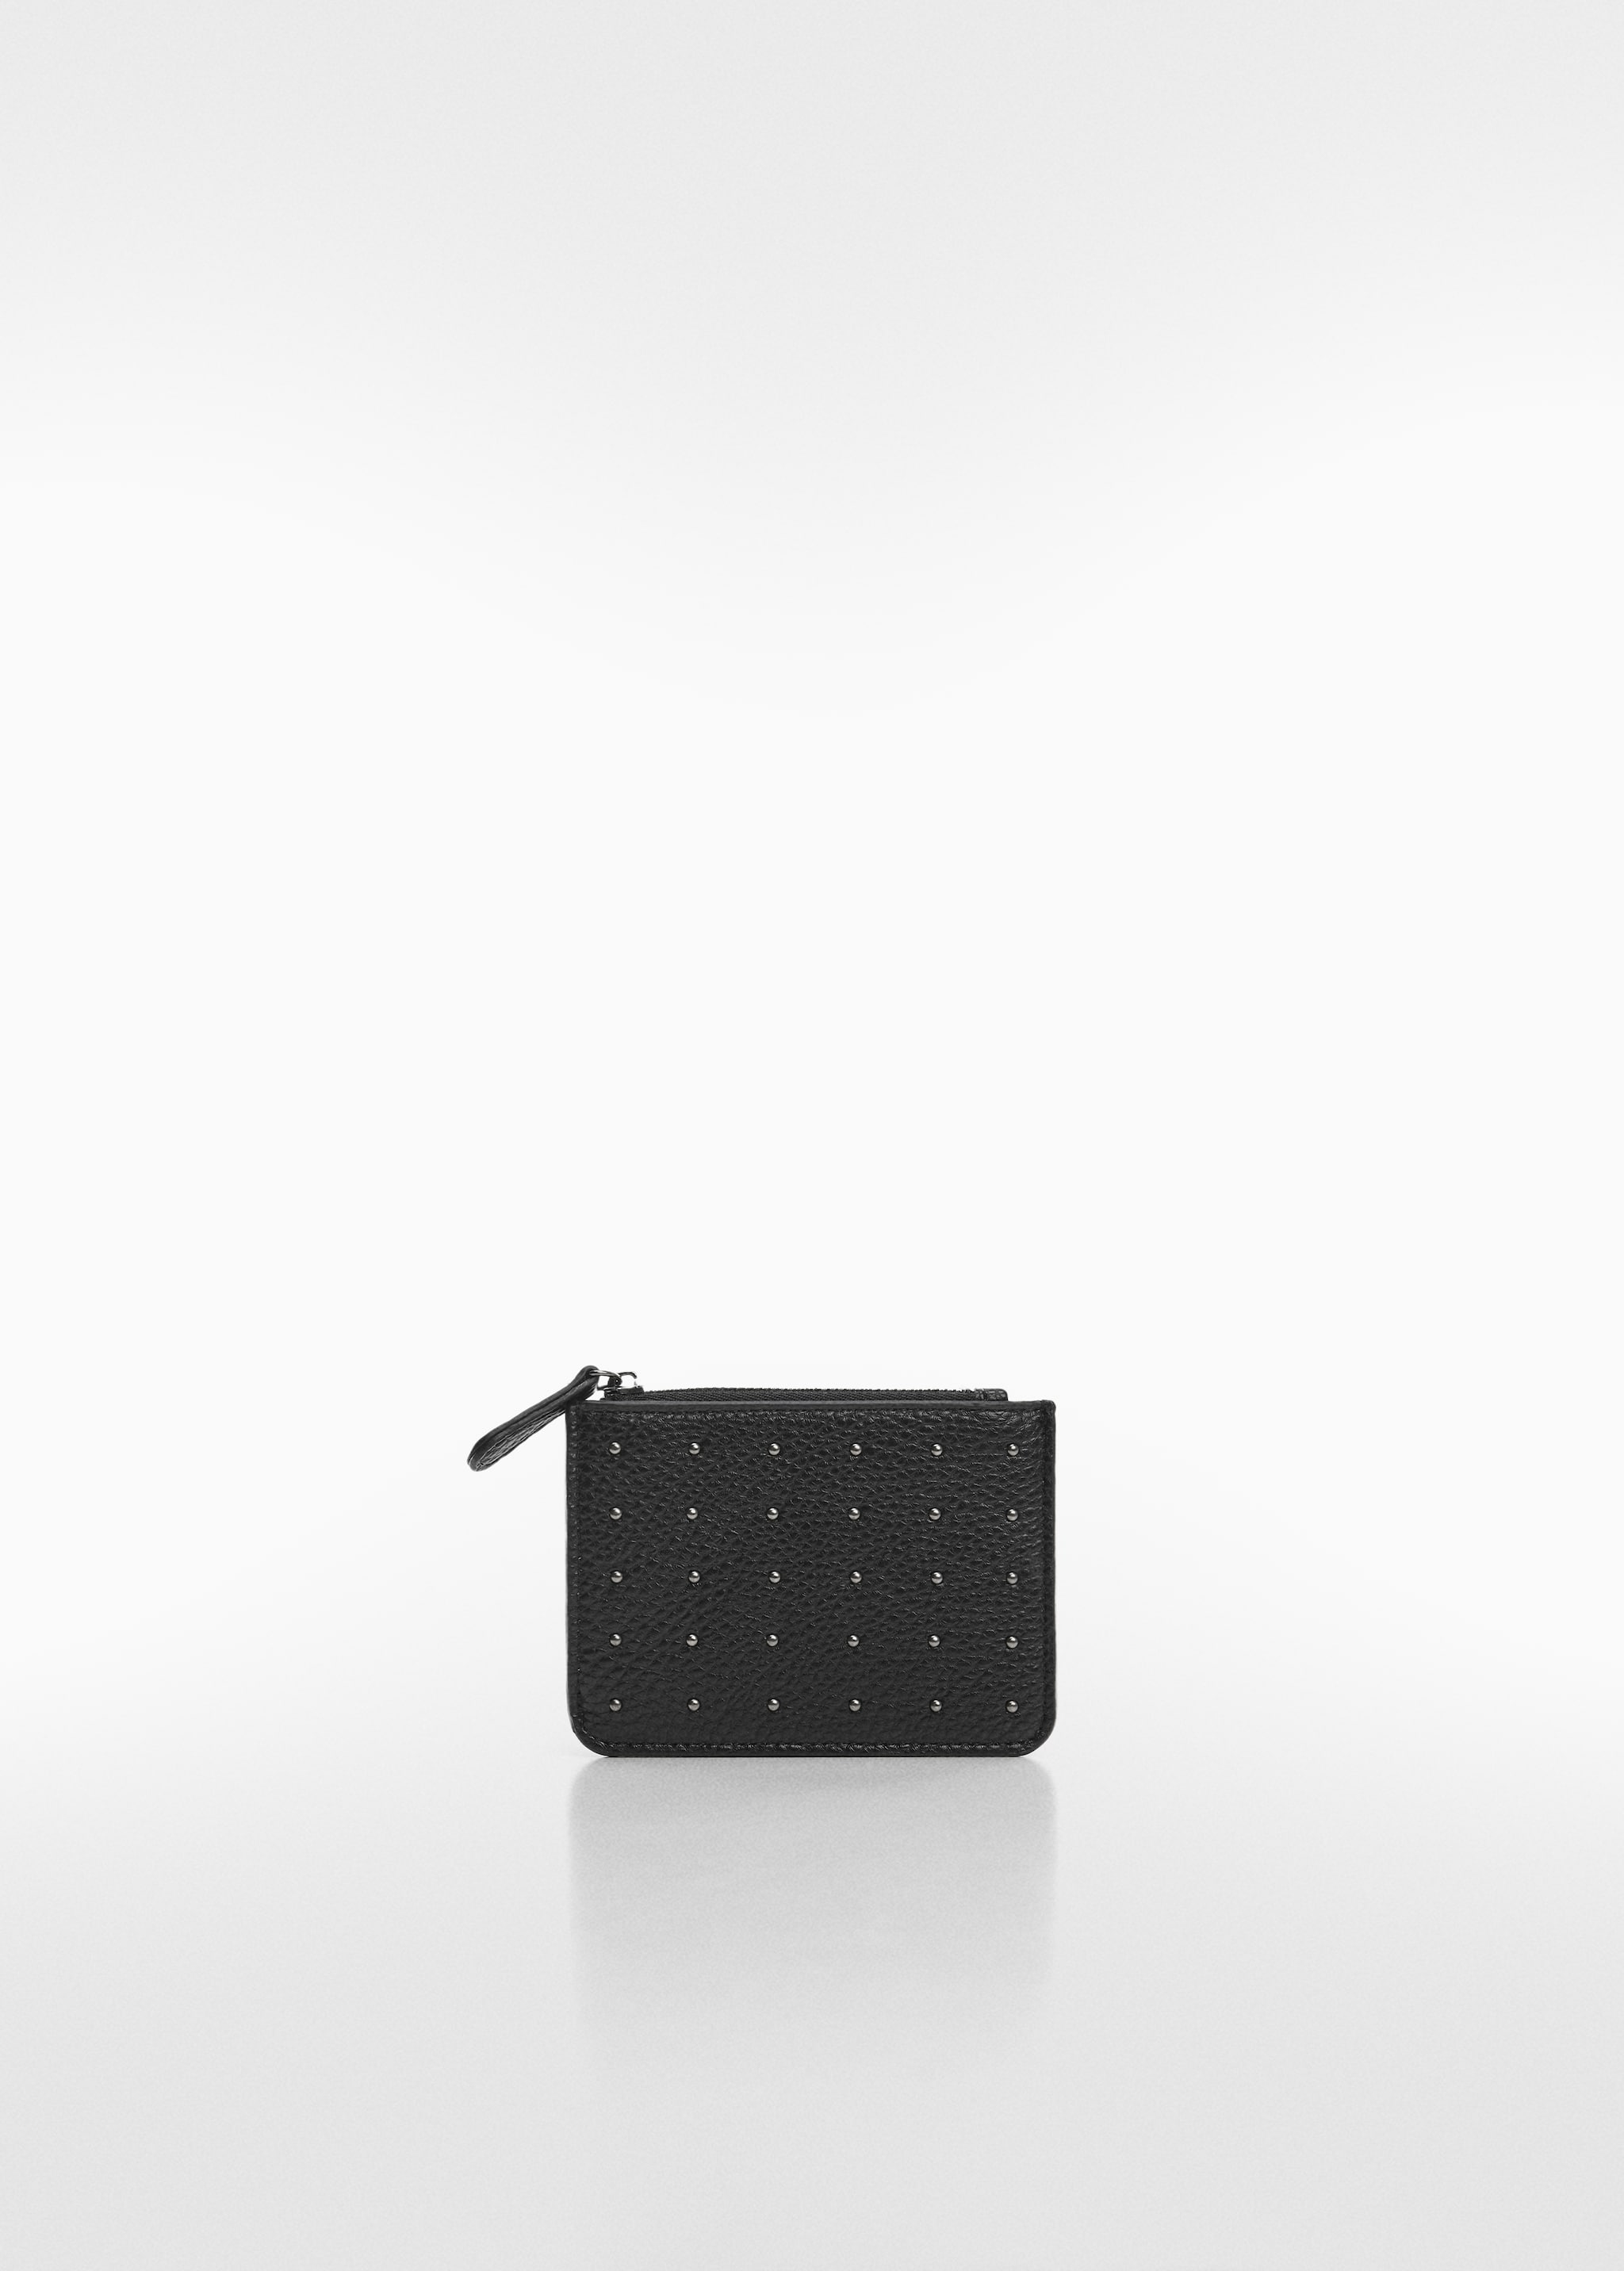 Studded purse - Article without model